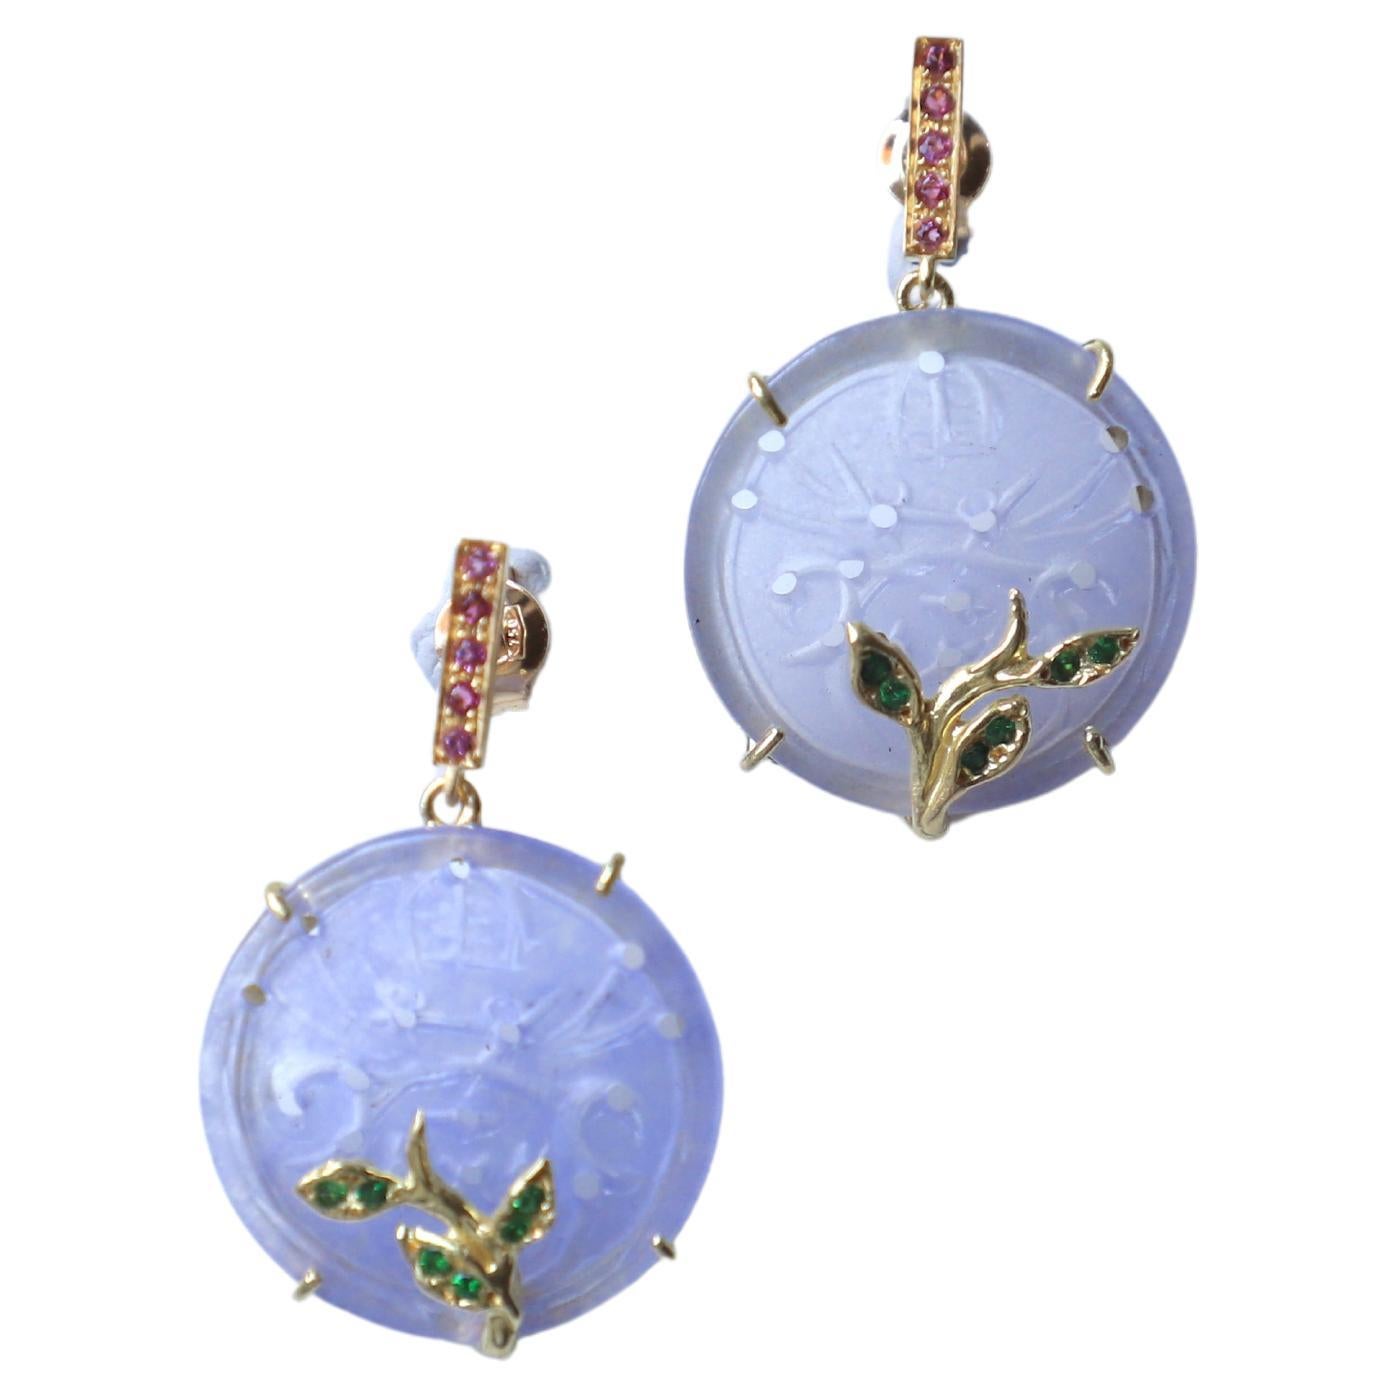 Rossella Ugolini 18K Gold Carved Rose Quartz Lilac Coin "Pansy Flower" Earrings